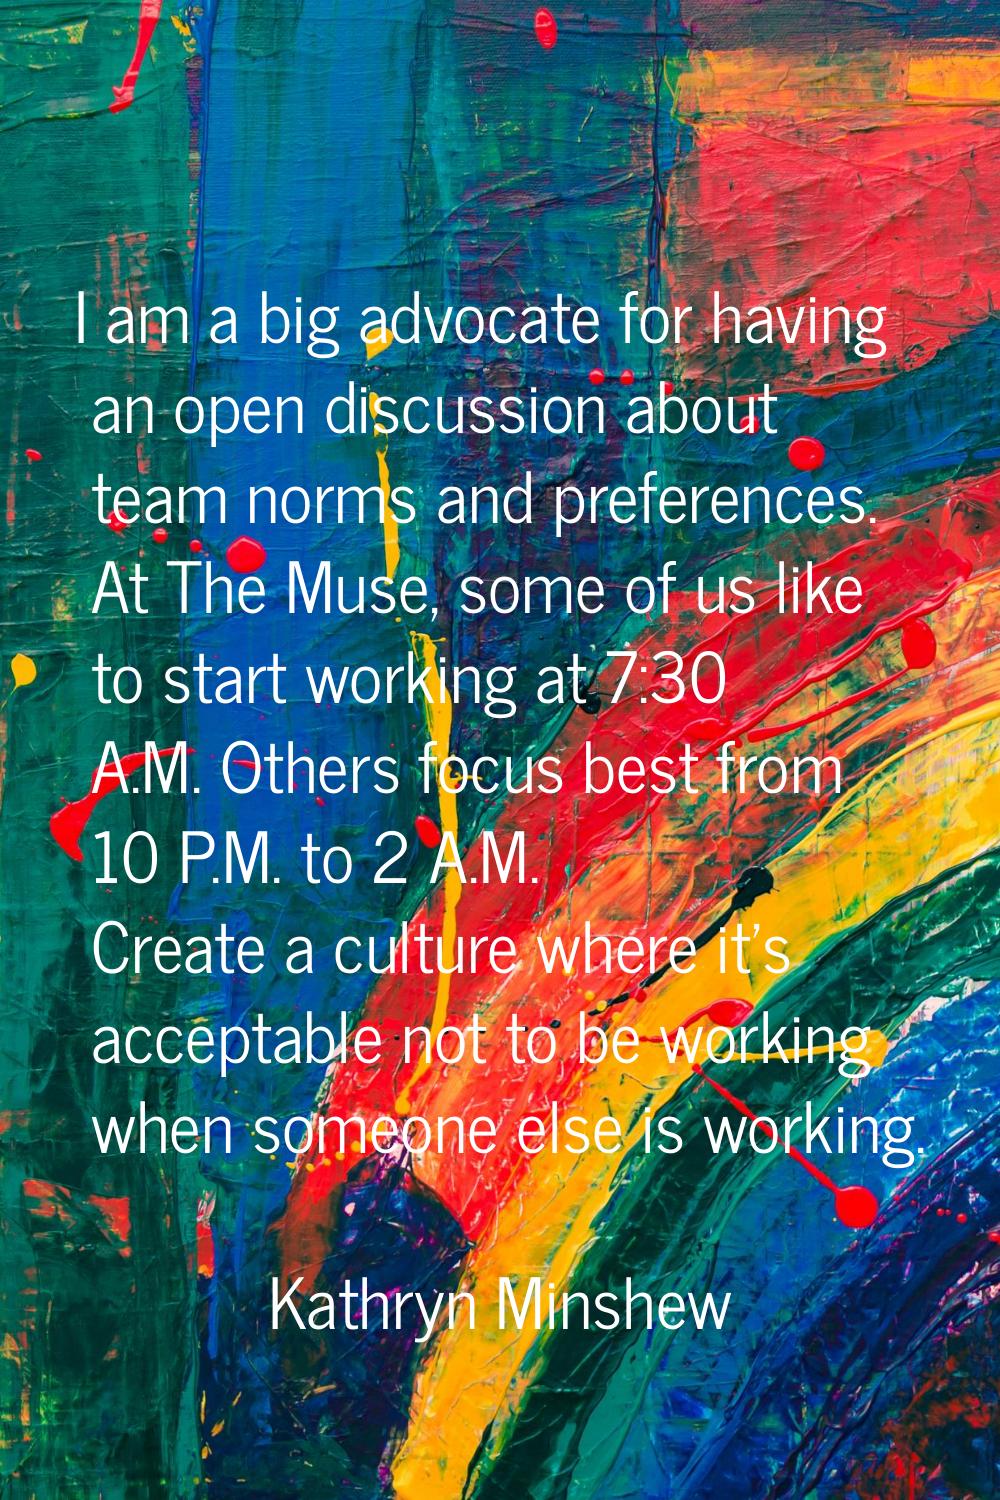 I am a big advocate for having an open discussion about team norms and preferences. At The Muse, so